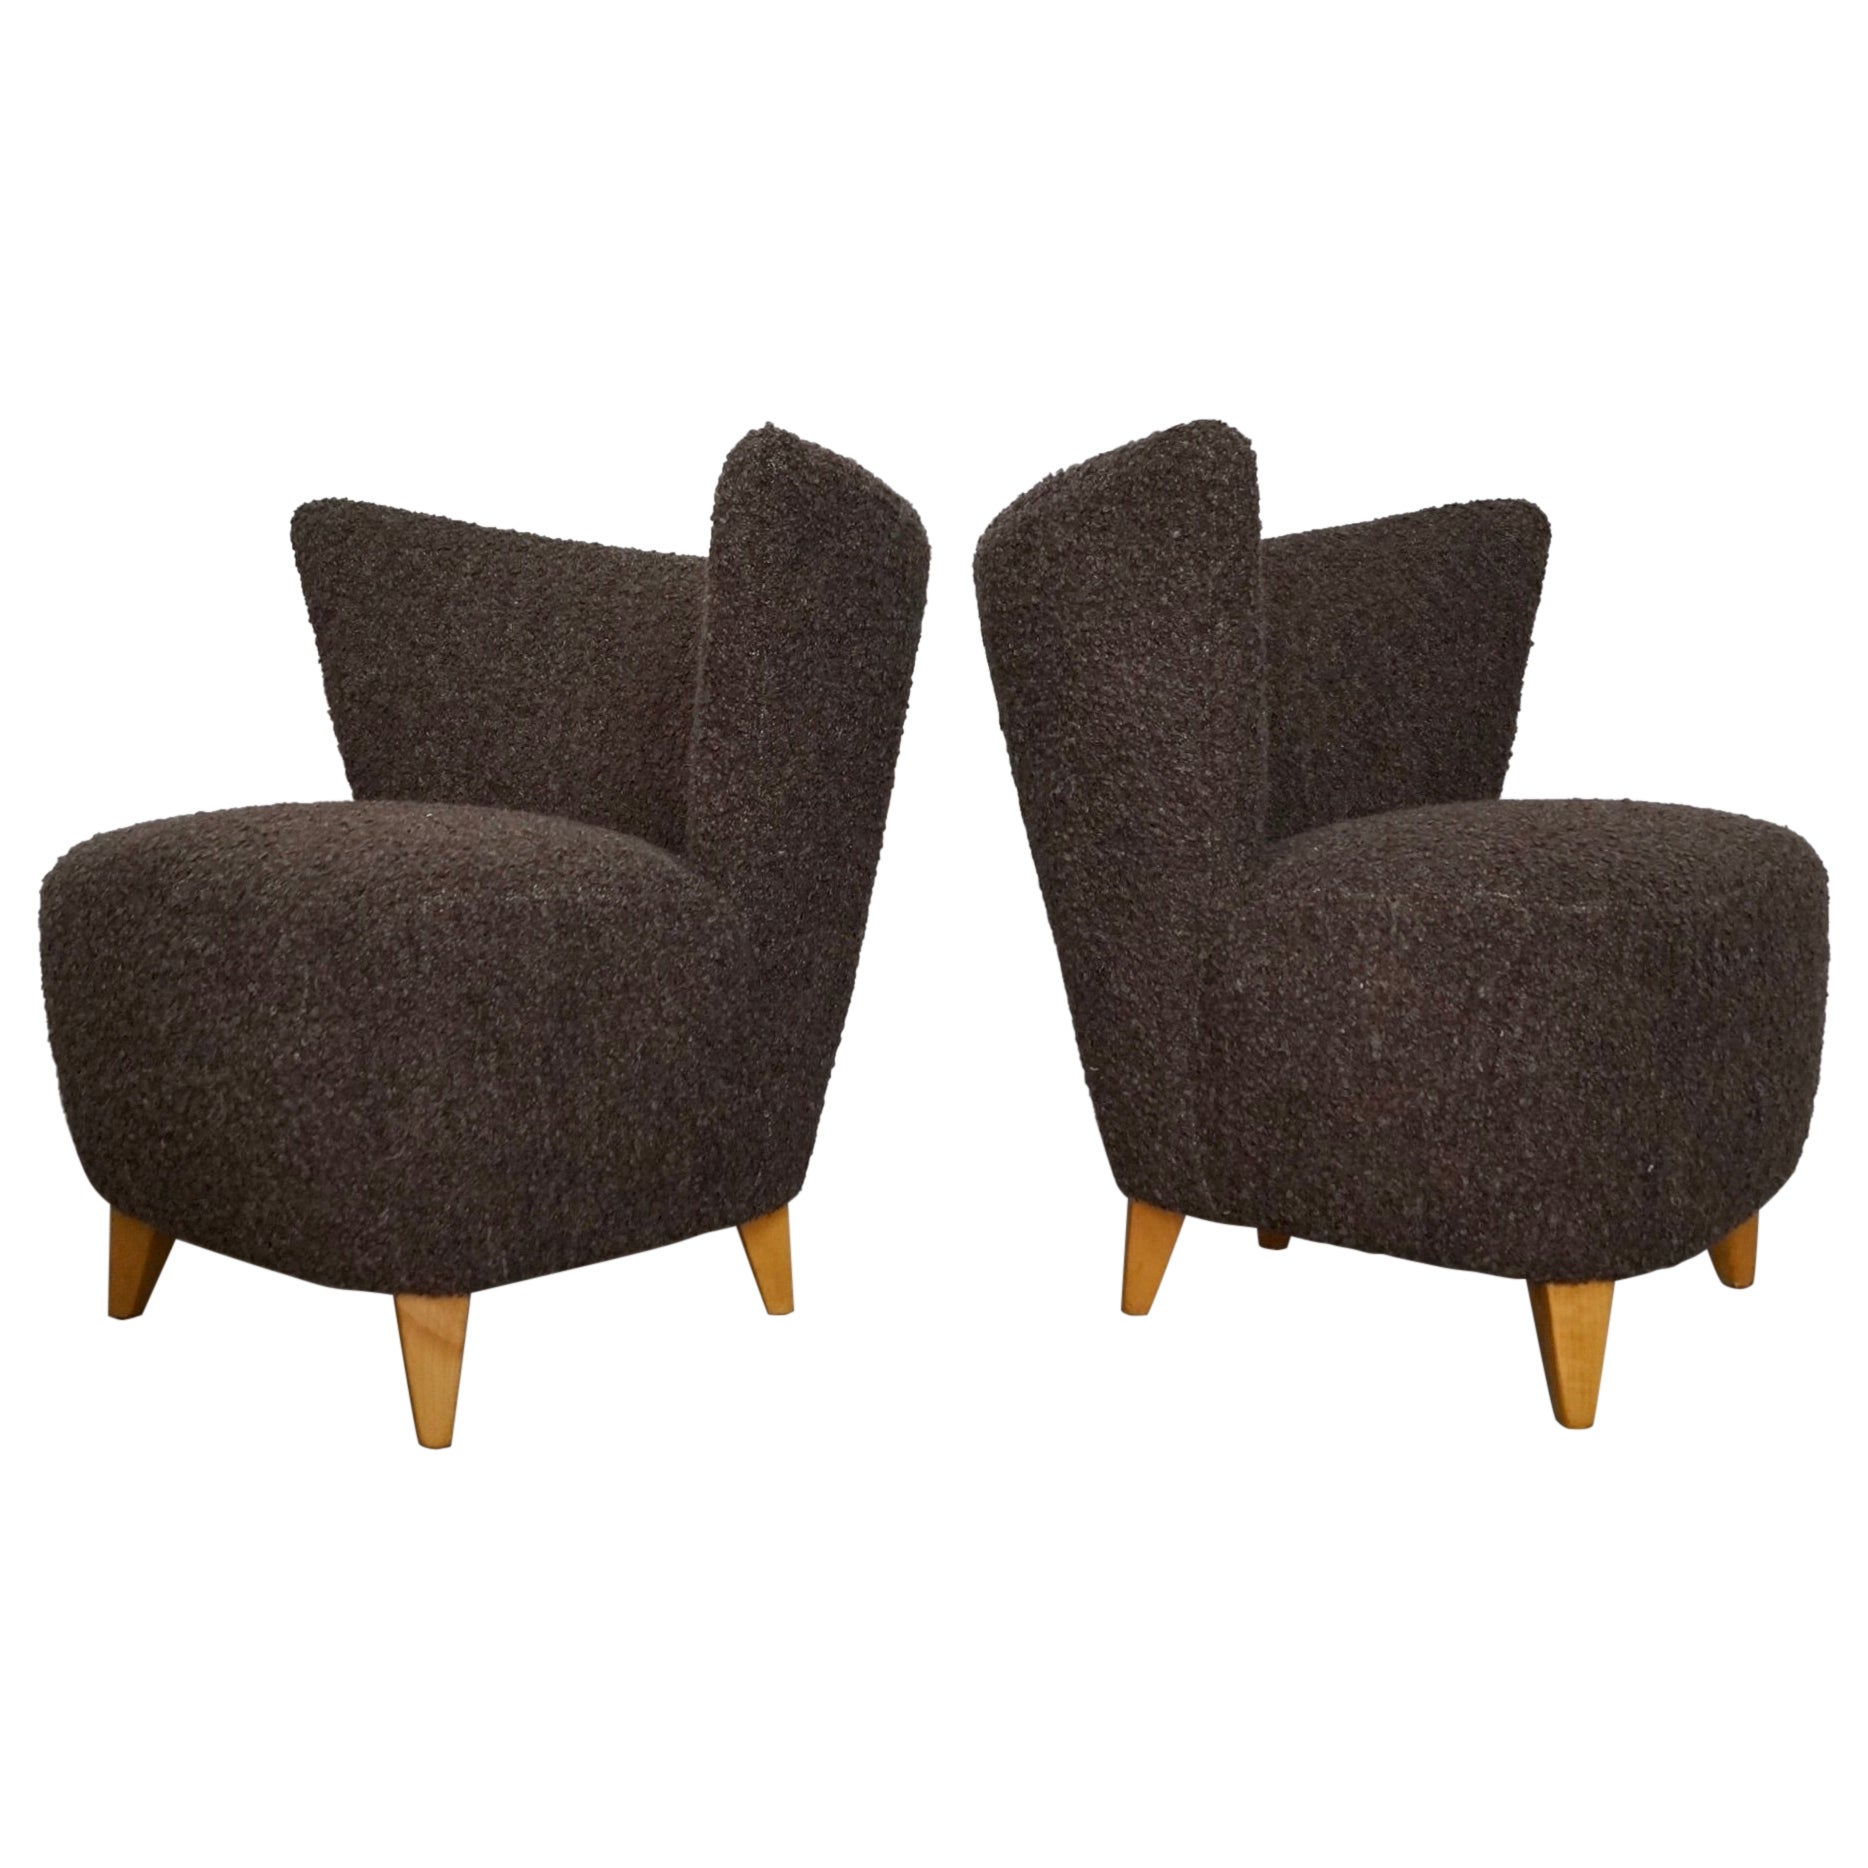 Pair of 1940's Art Deco Wingback Lounge Chairs Reupholstered in Belgic Wool